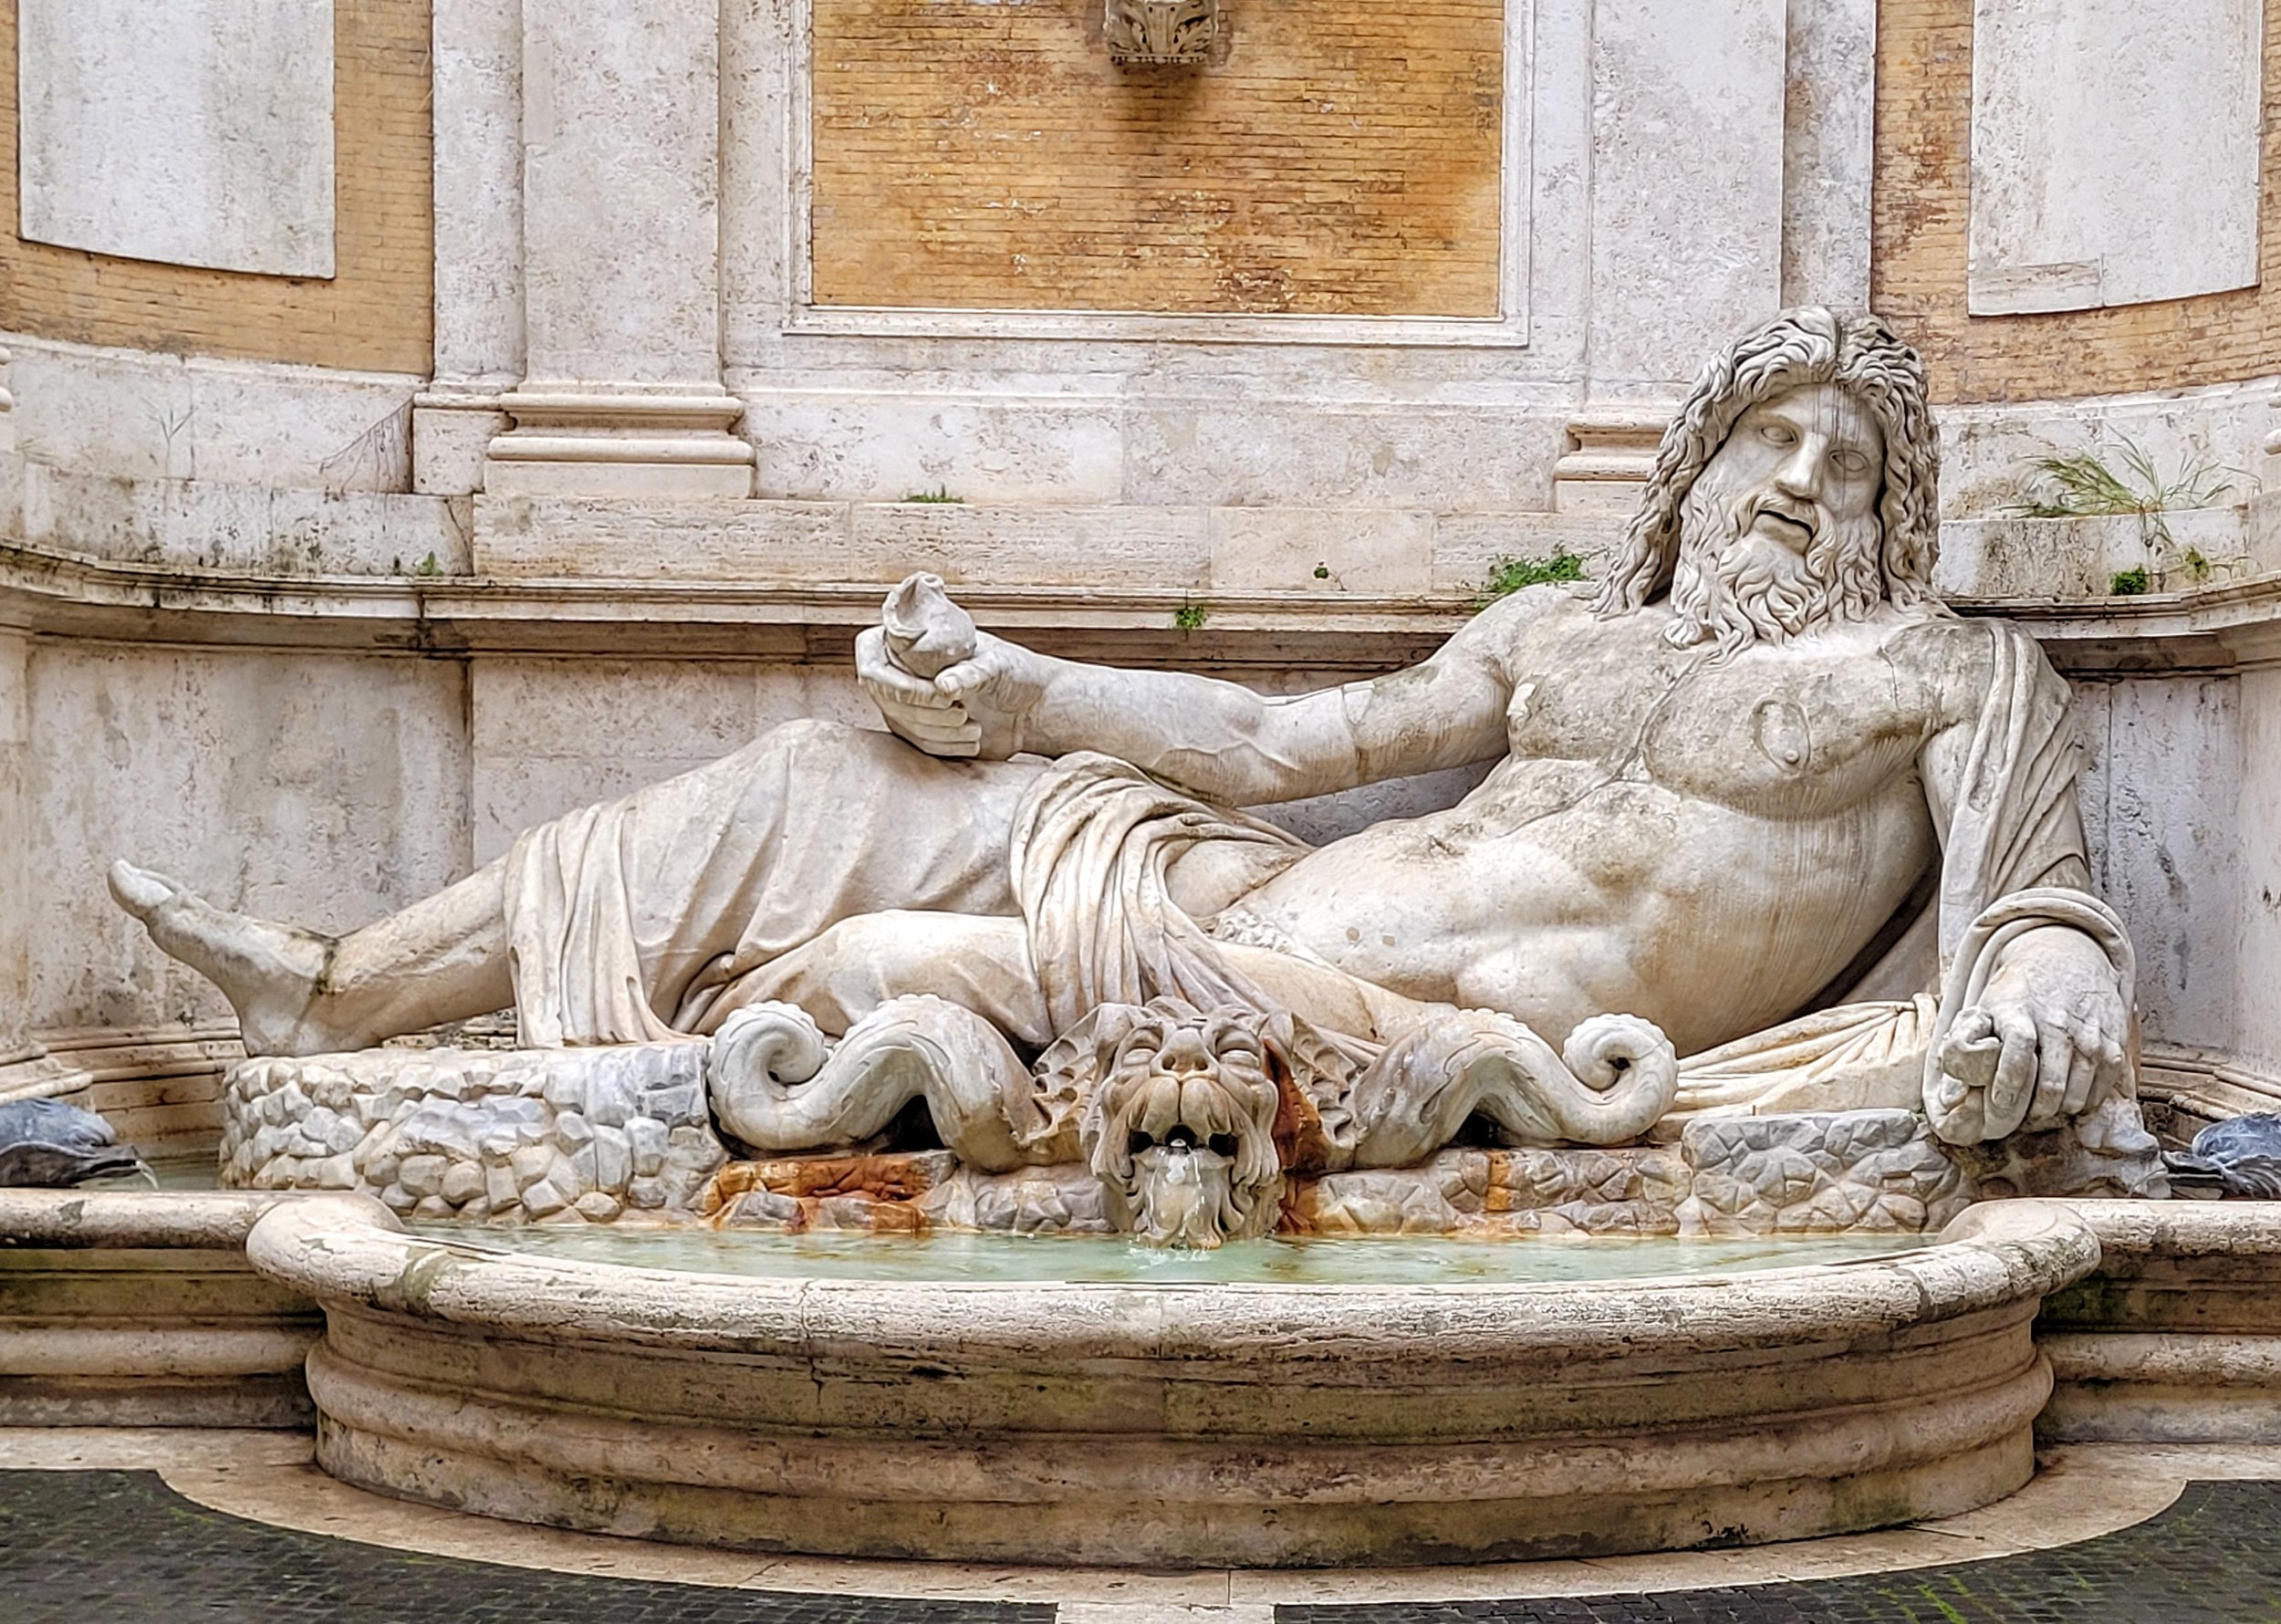 Second Time In Rome - Marforio The River God